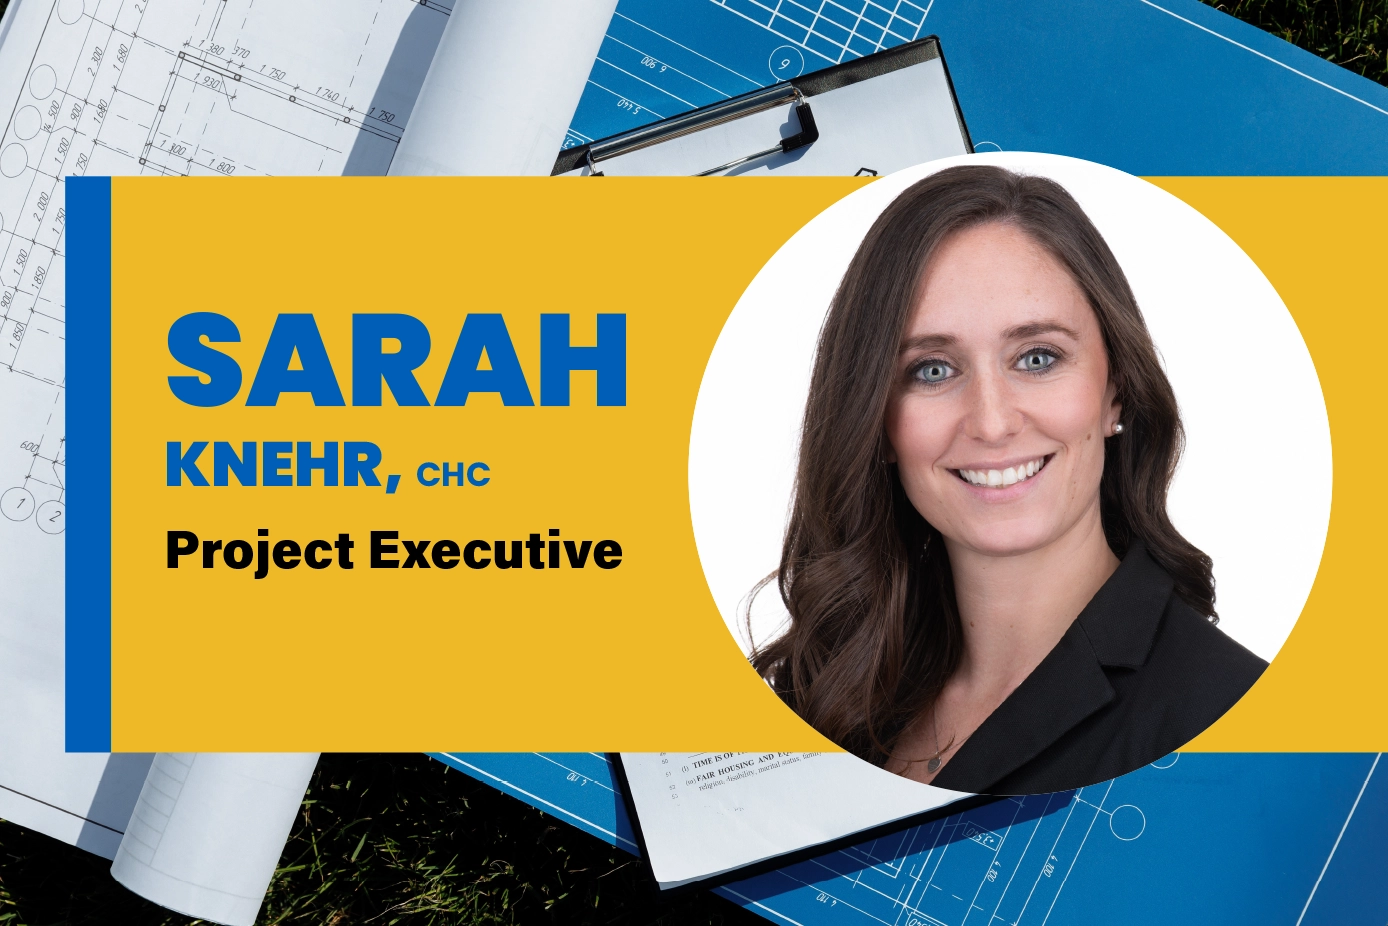 Sarah Knehr promoted to project executive and healthcare team leader.